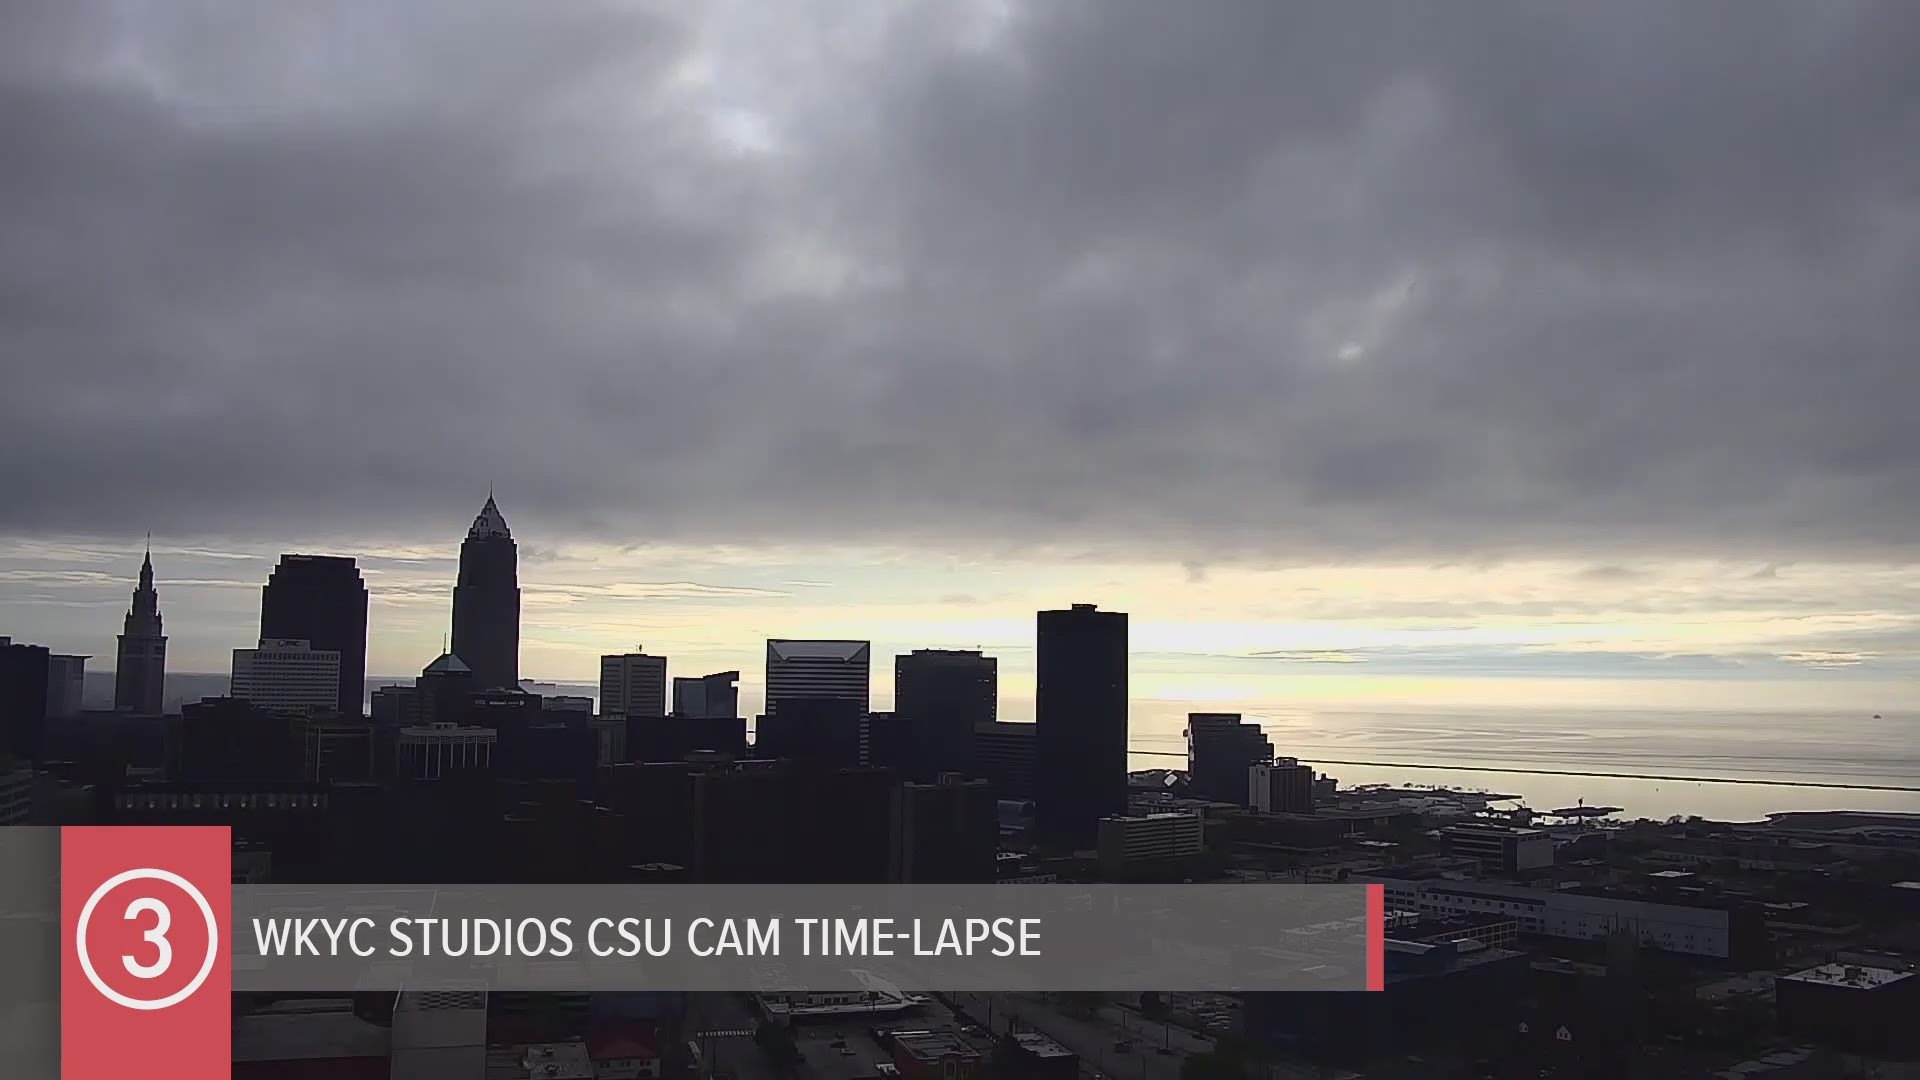 Check out the sunset weather time-lapse tonight and the several layers of clouds moving in different directions as seen from the WKYC Studios CSU Cam. #3weather